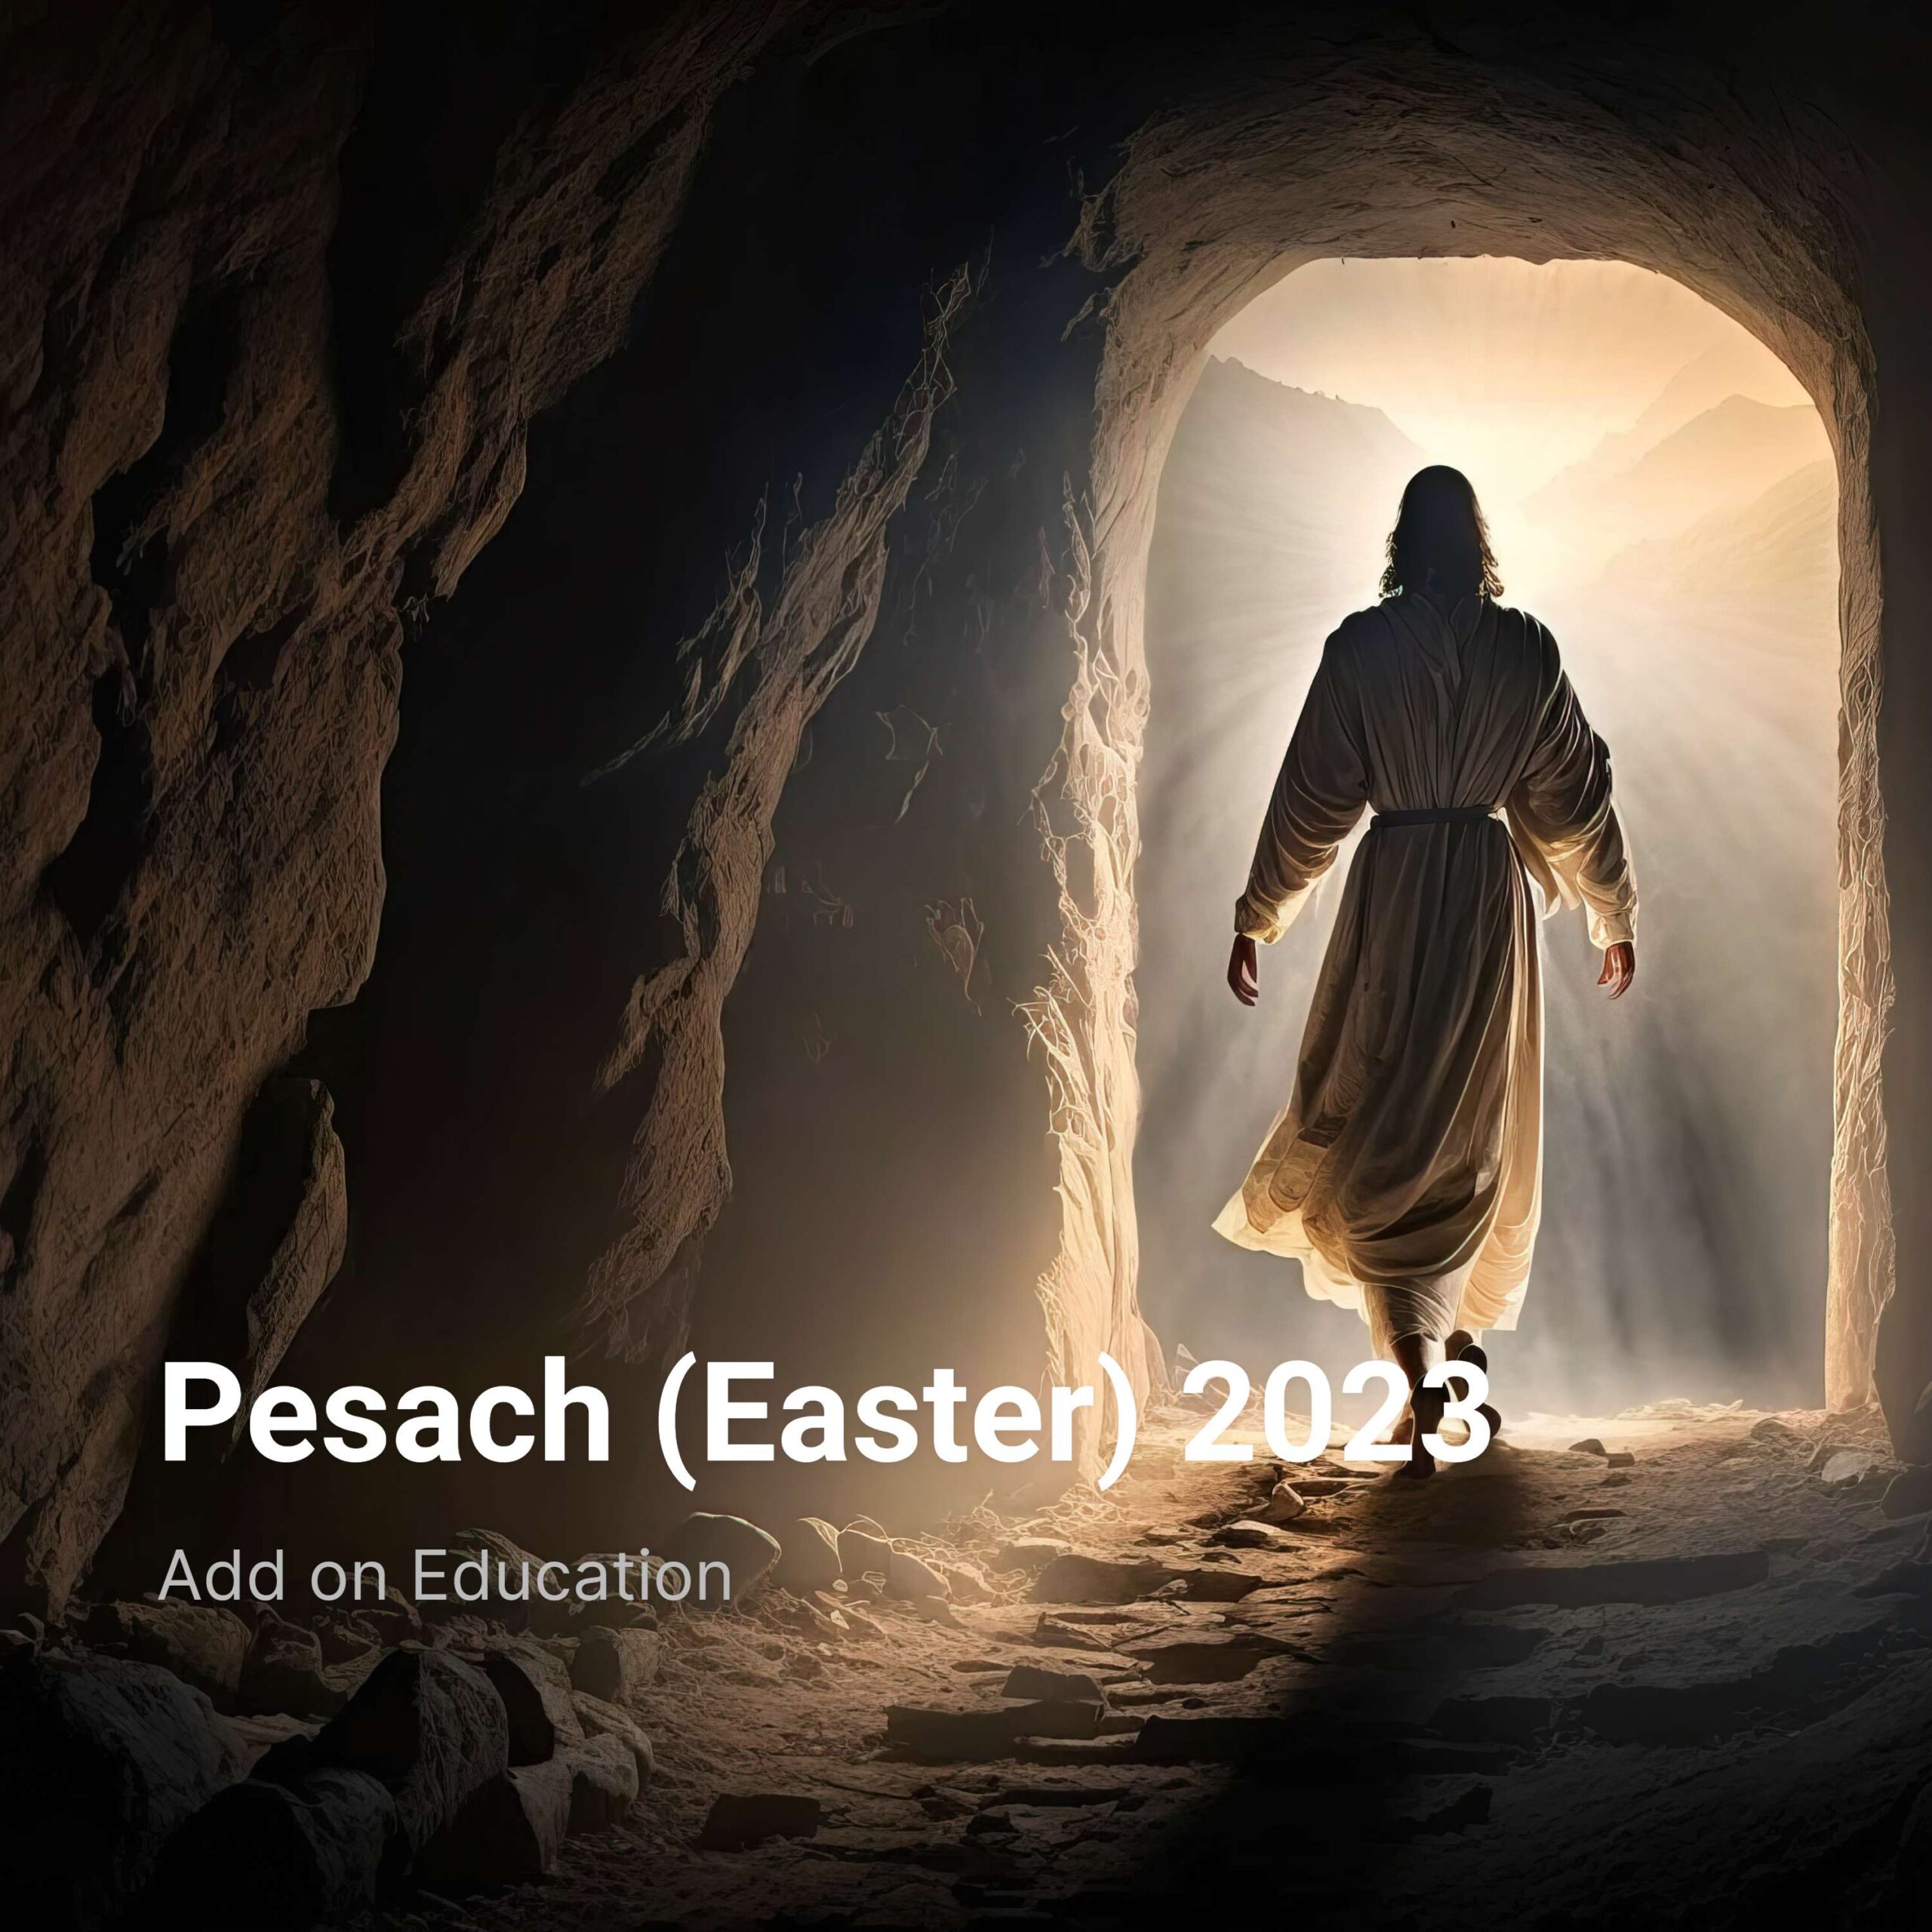 Pesach (Easter) 2023